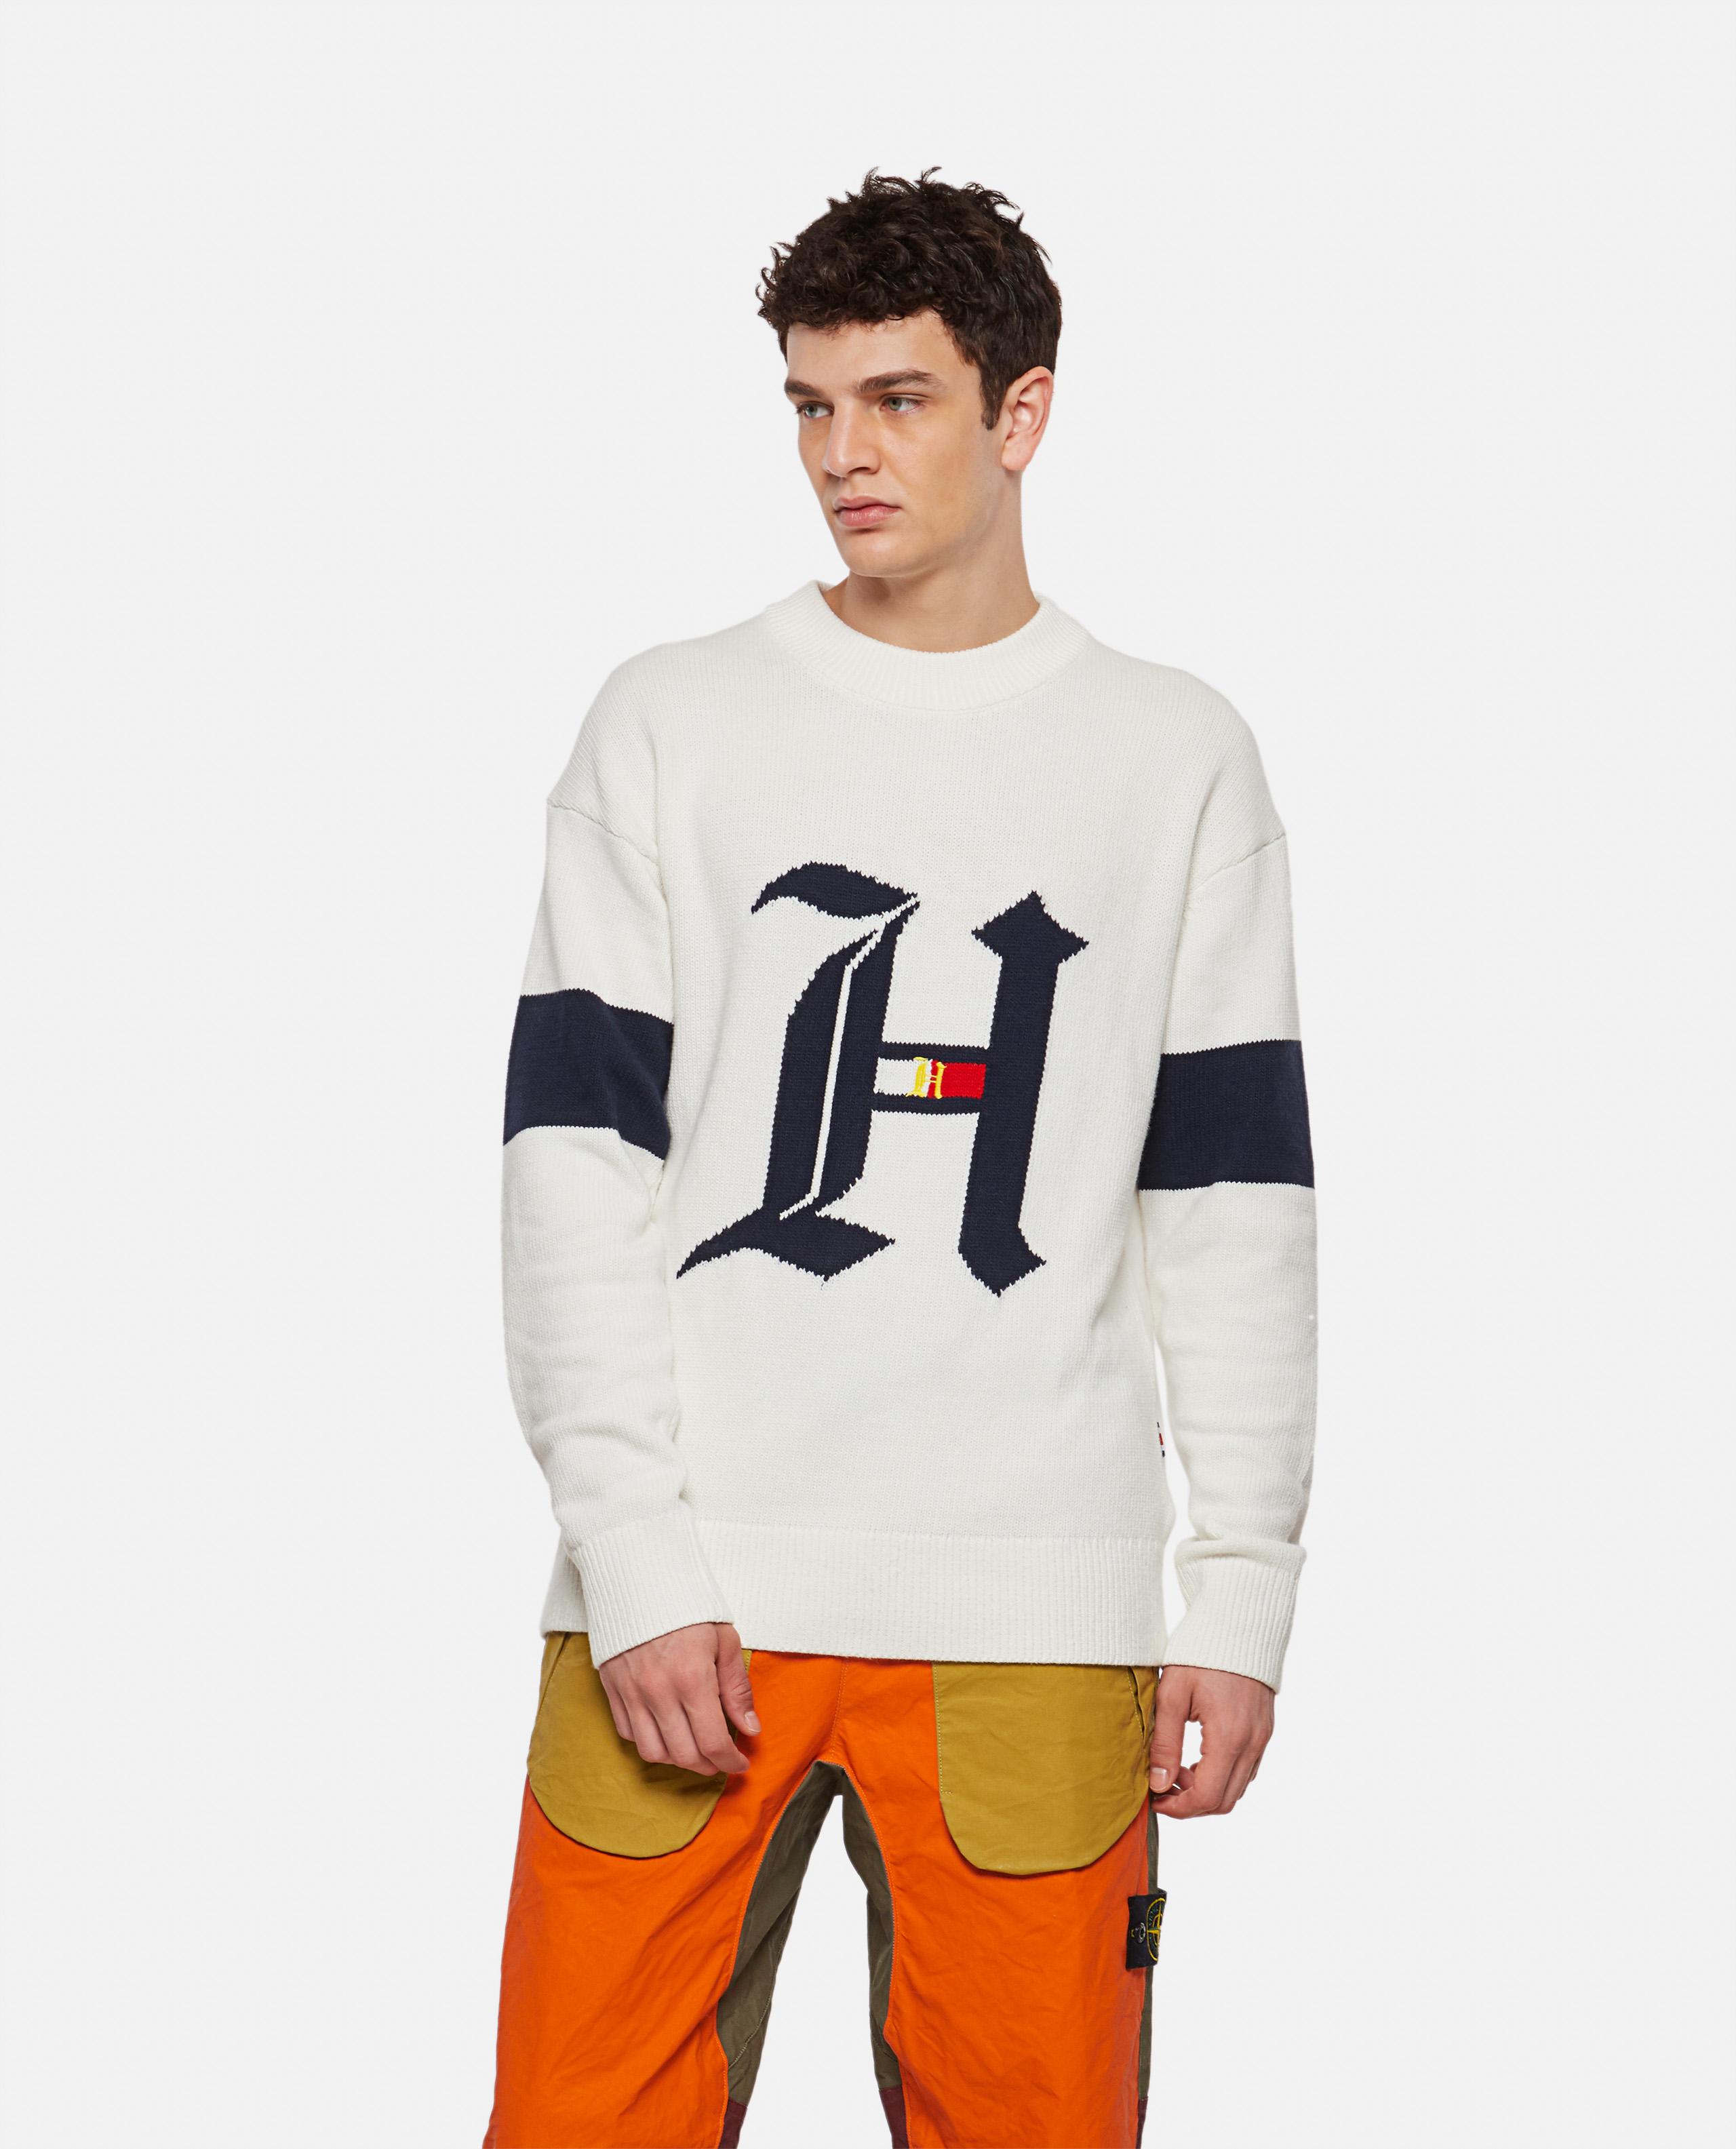 Tommy Hilfiger Lewis X in White for Men - Lyst